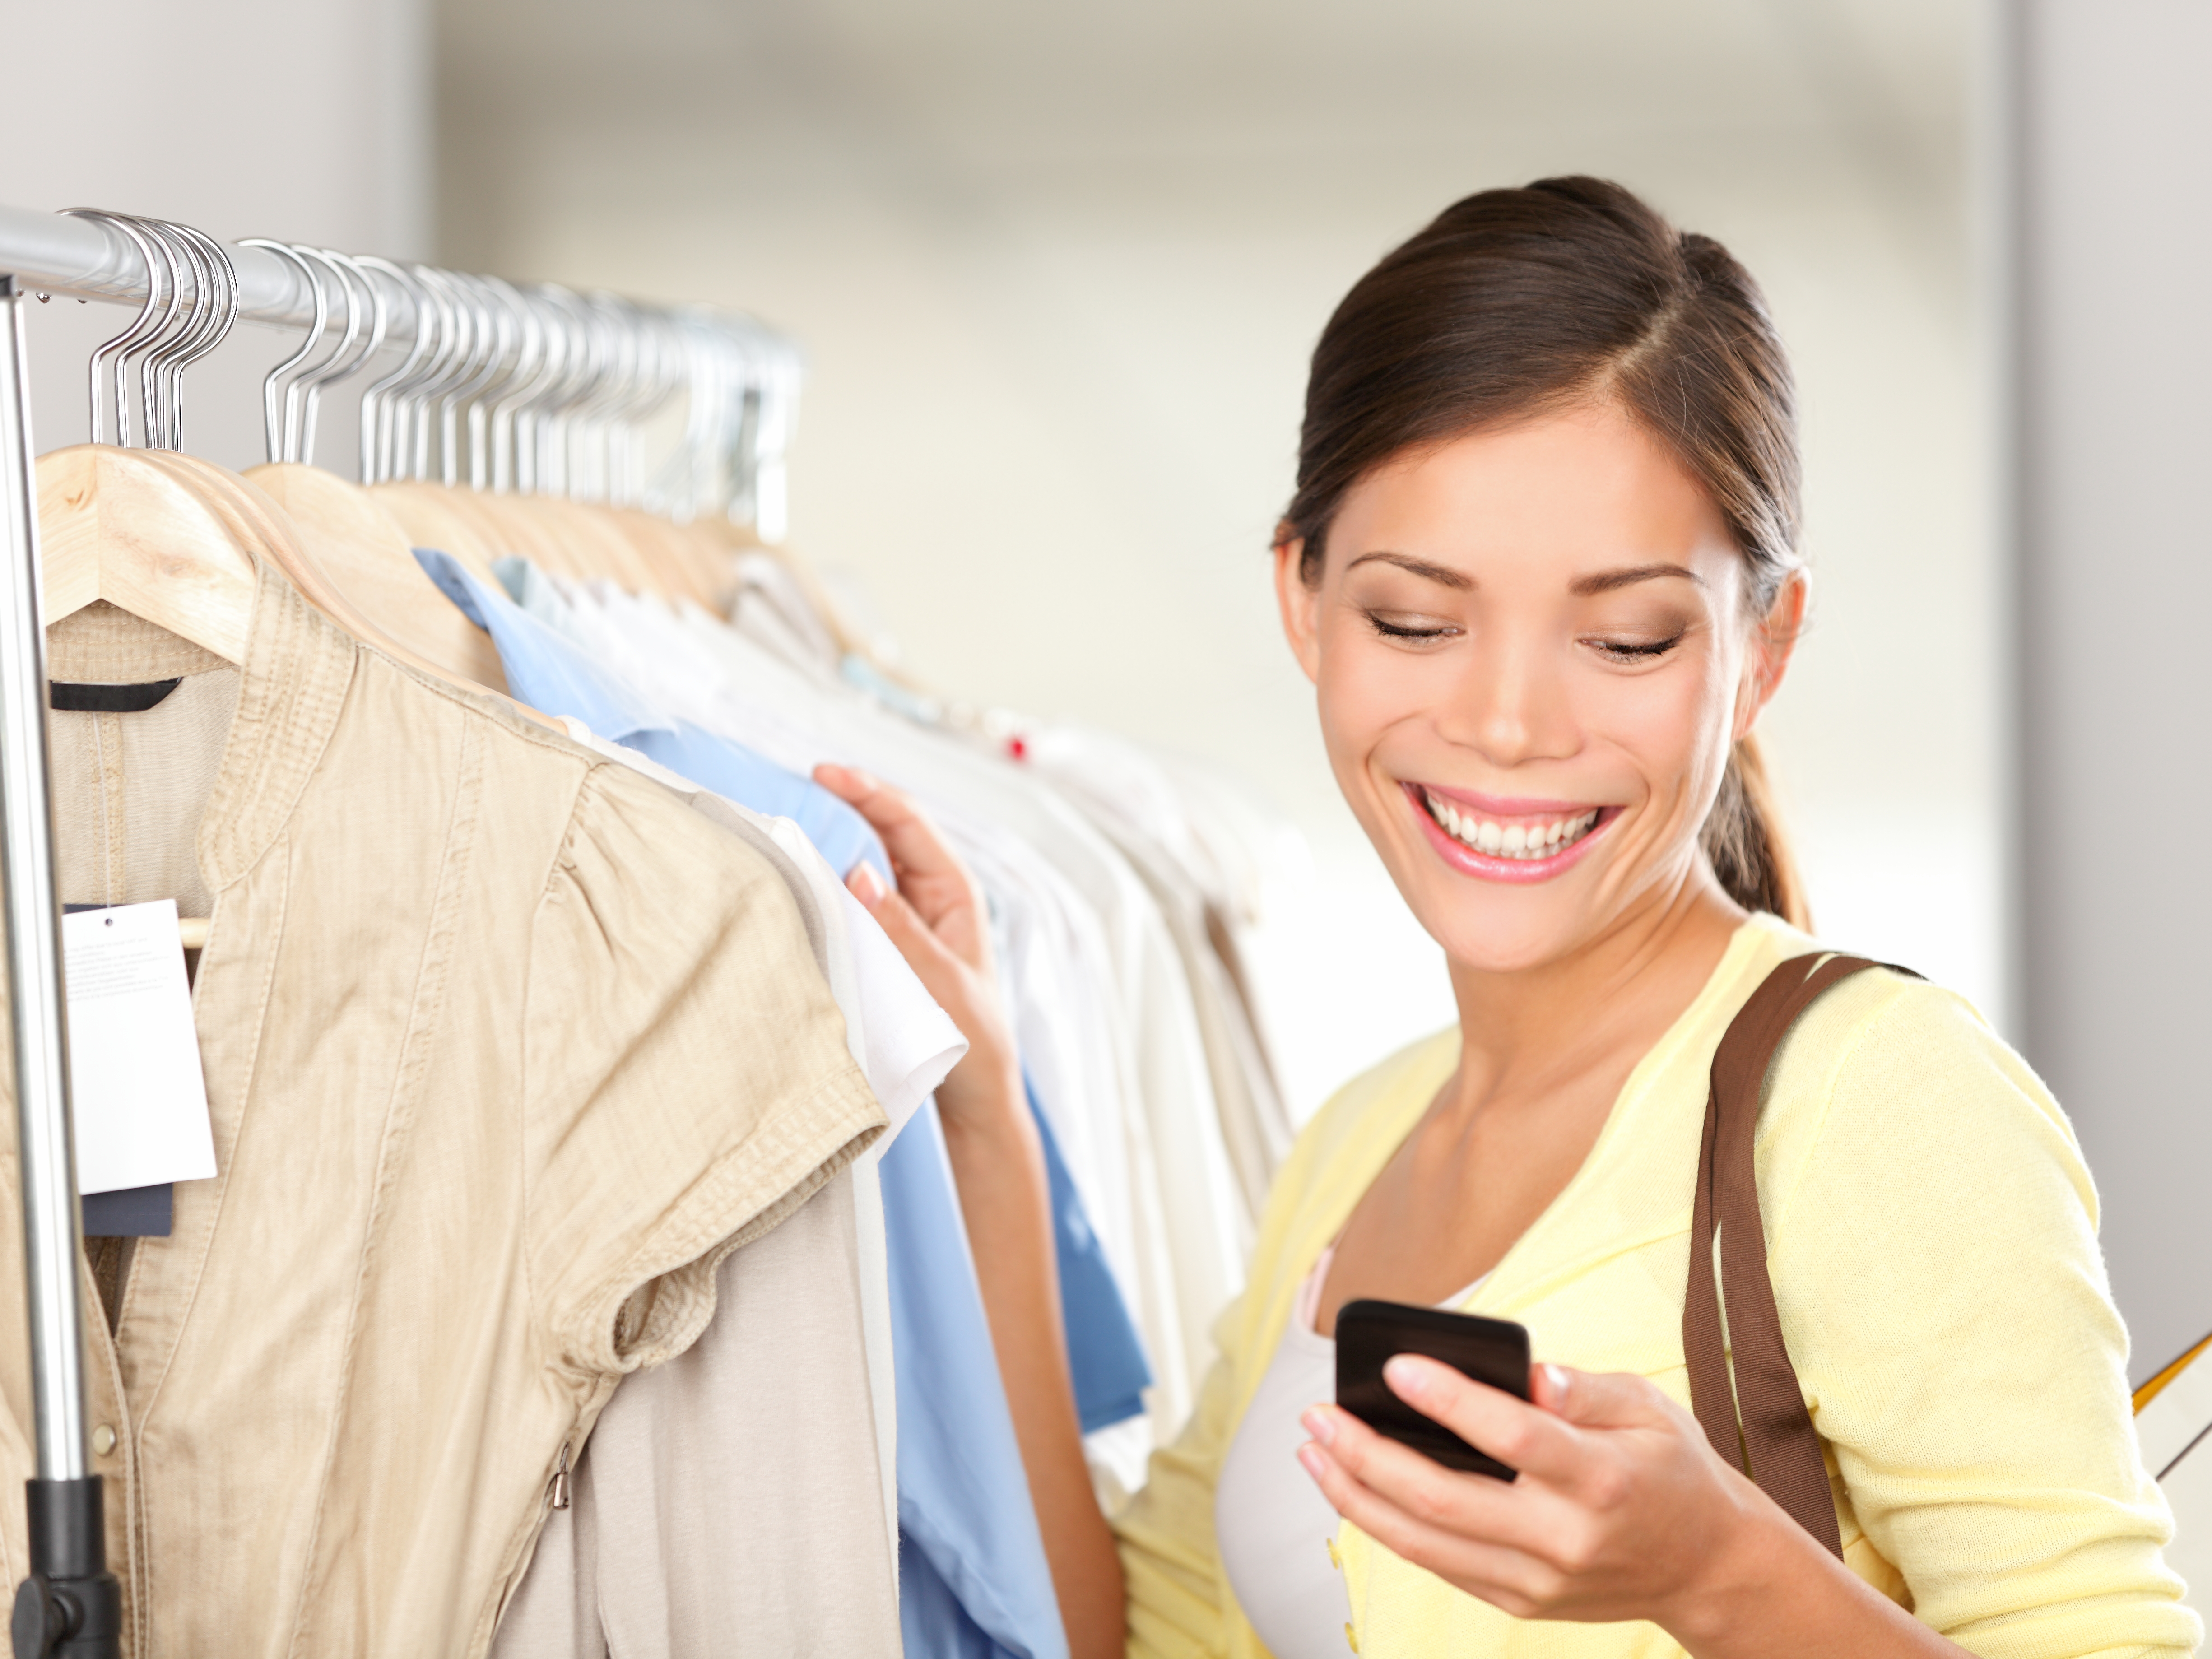 brown haired lady smiling at a phone she is holding in one hand while touching a rack of clothing with the other hand